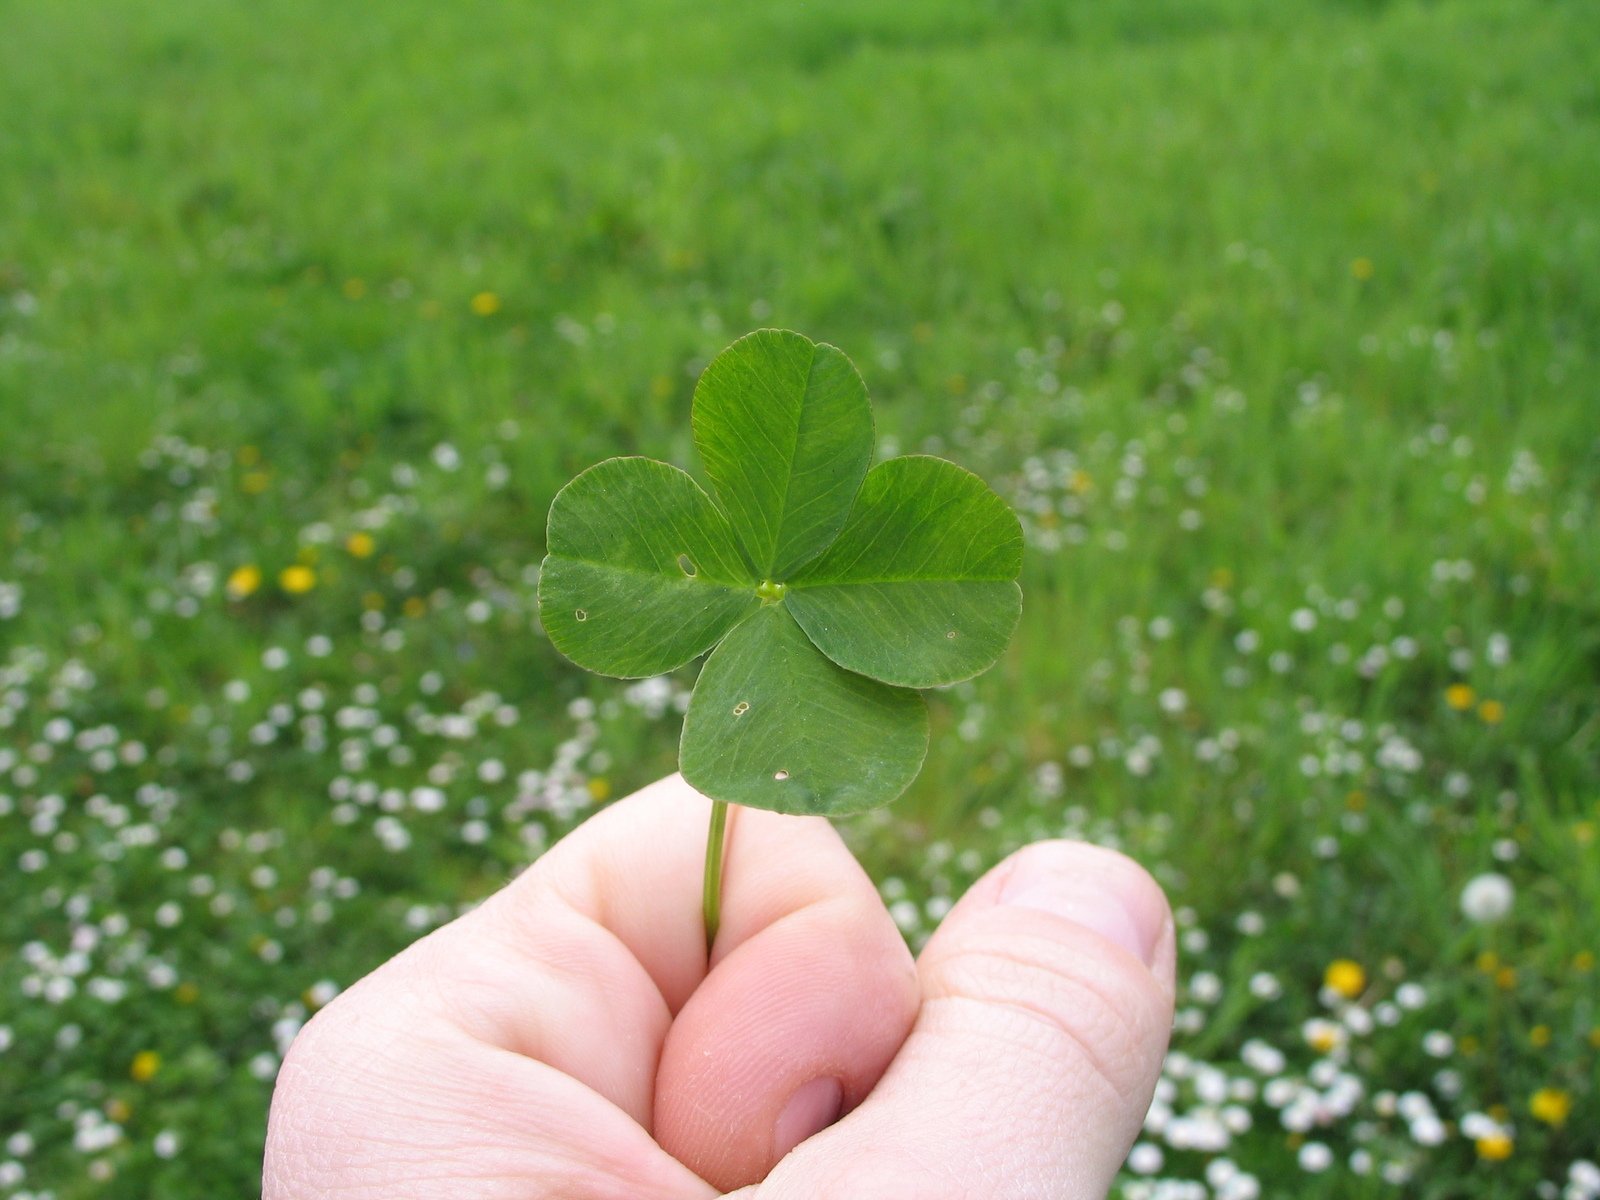 the small leaf of the four - leafed clover is visible from the palm